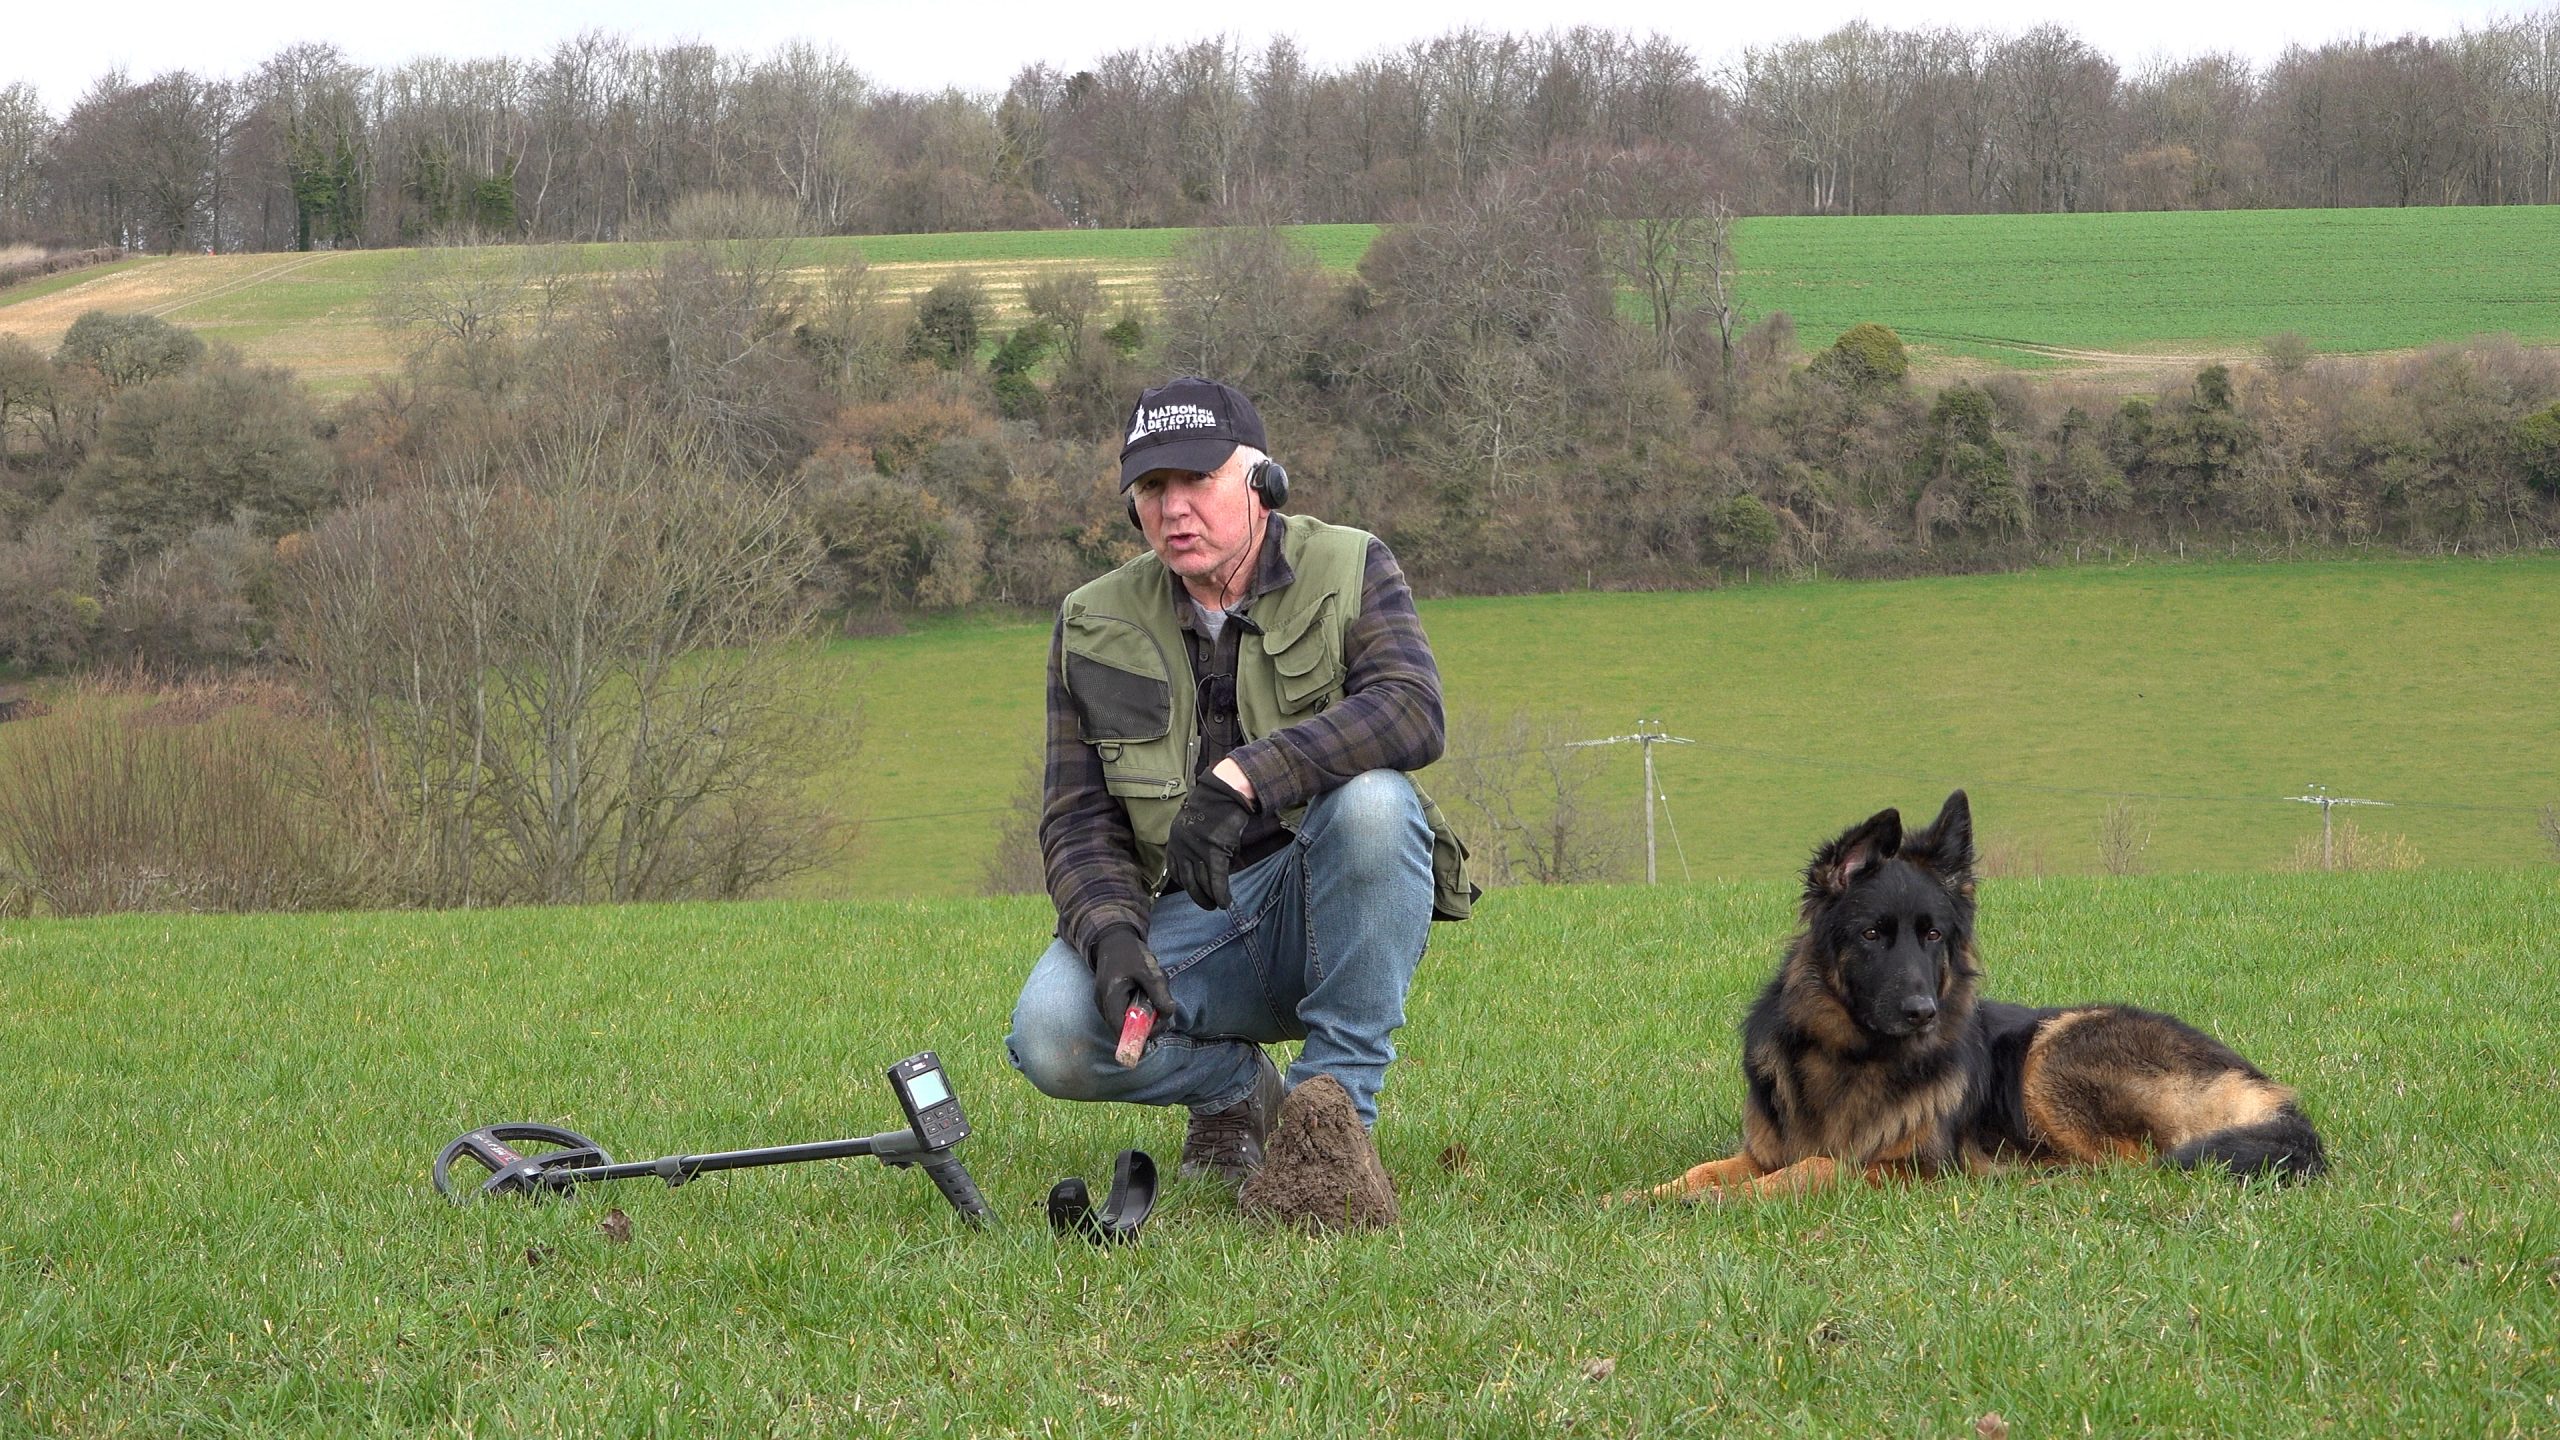 Man in a field with a metal detector next to a large German Shepherd with hills in the background